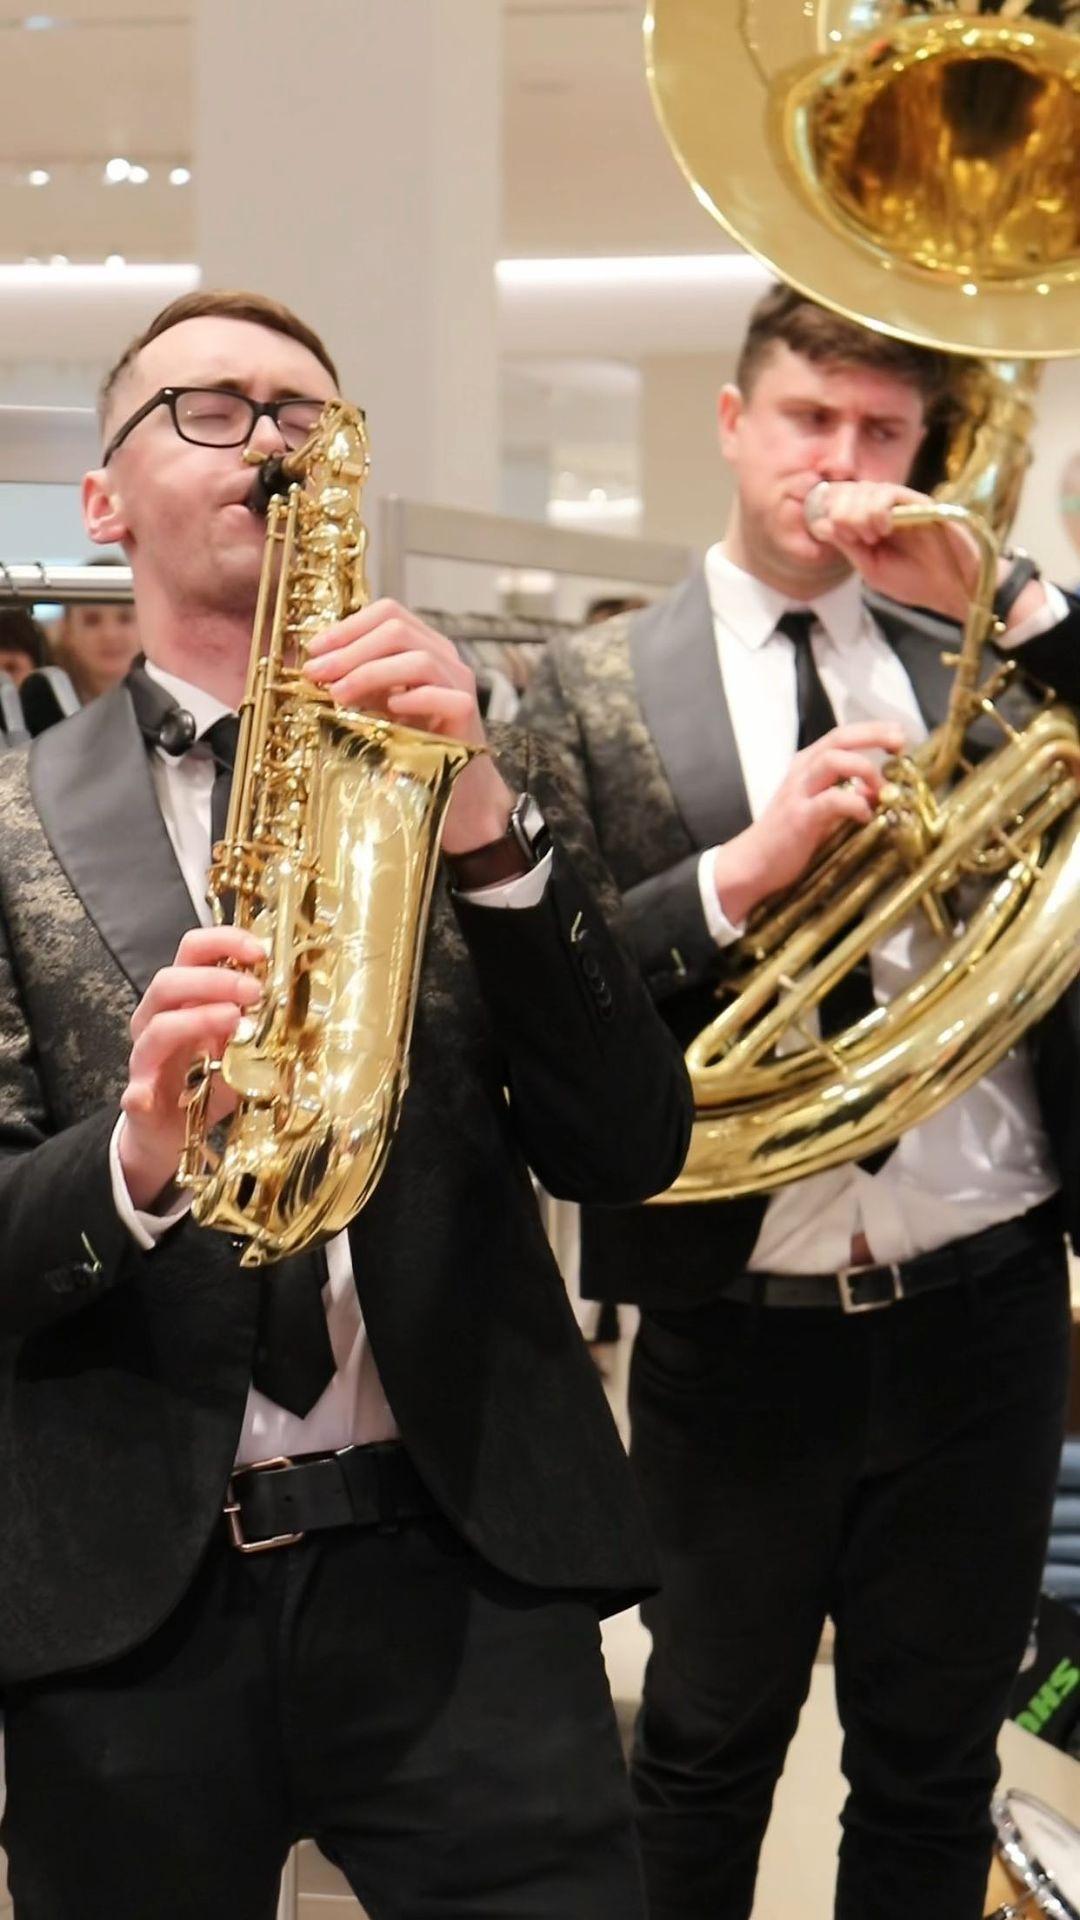 class="content__text"
 Birthday Celebrations. Join the party in Brown Thomas Dundrum. Bring your family and friends to enjoy special performances by @thenewbrasskings from 1pm -3pm
today.

Enjoy exclusive experiences, games and 10% back in loyalty points today in store.

 #BrownThomas 
 